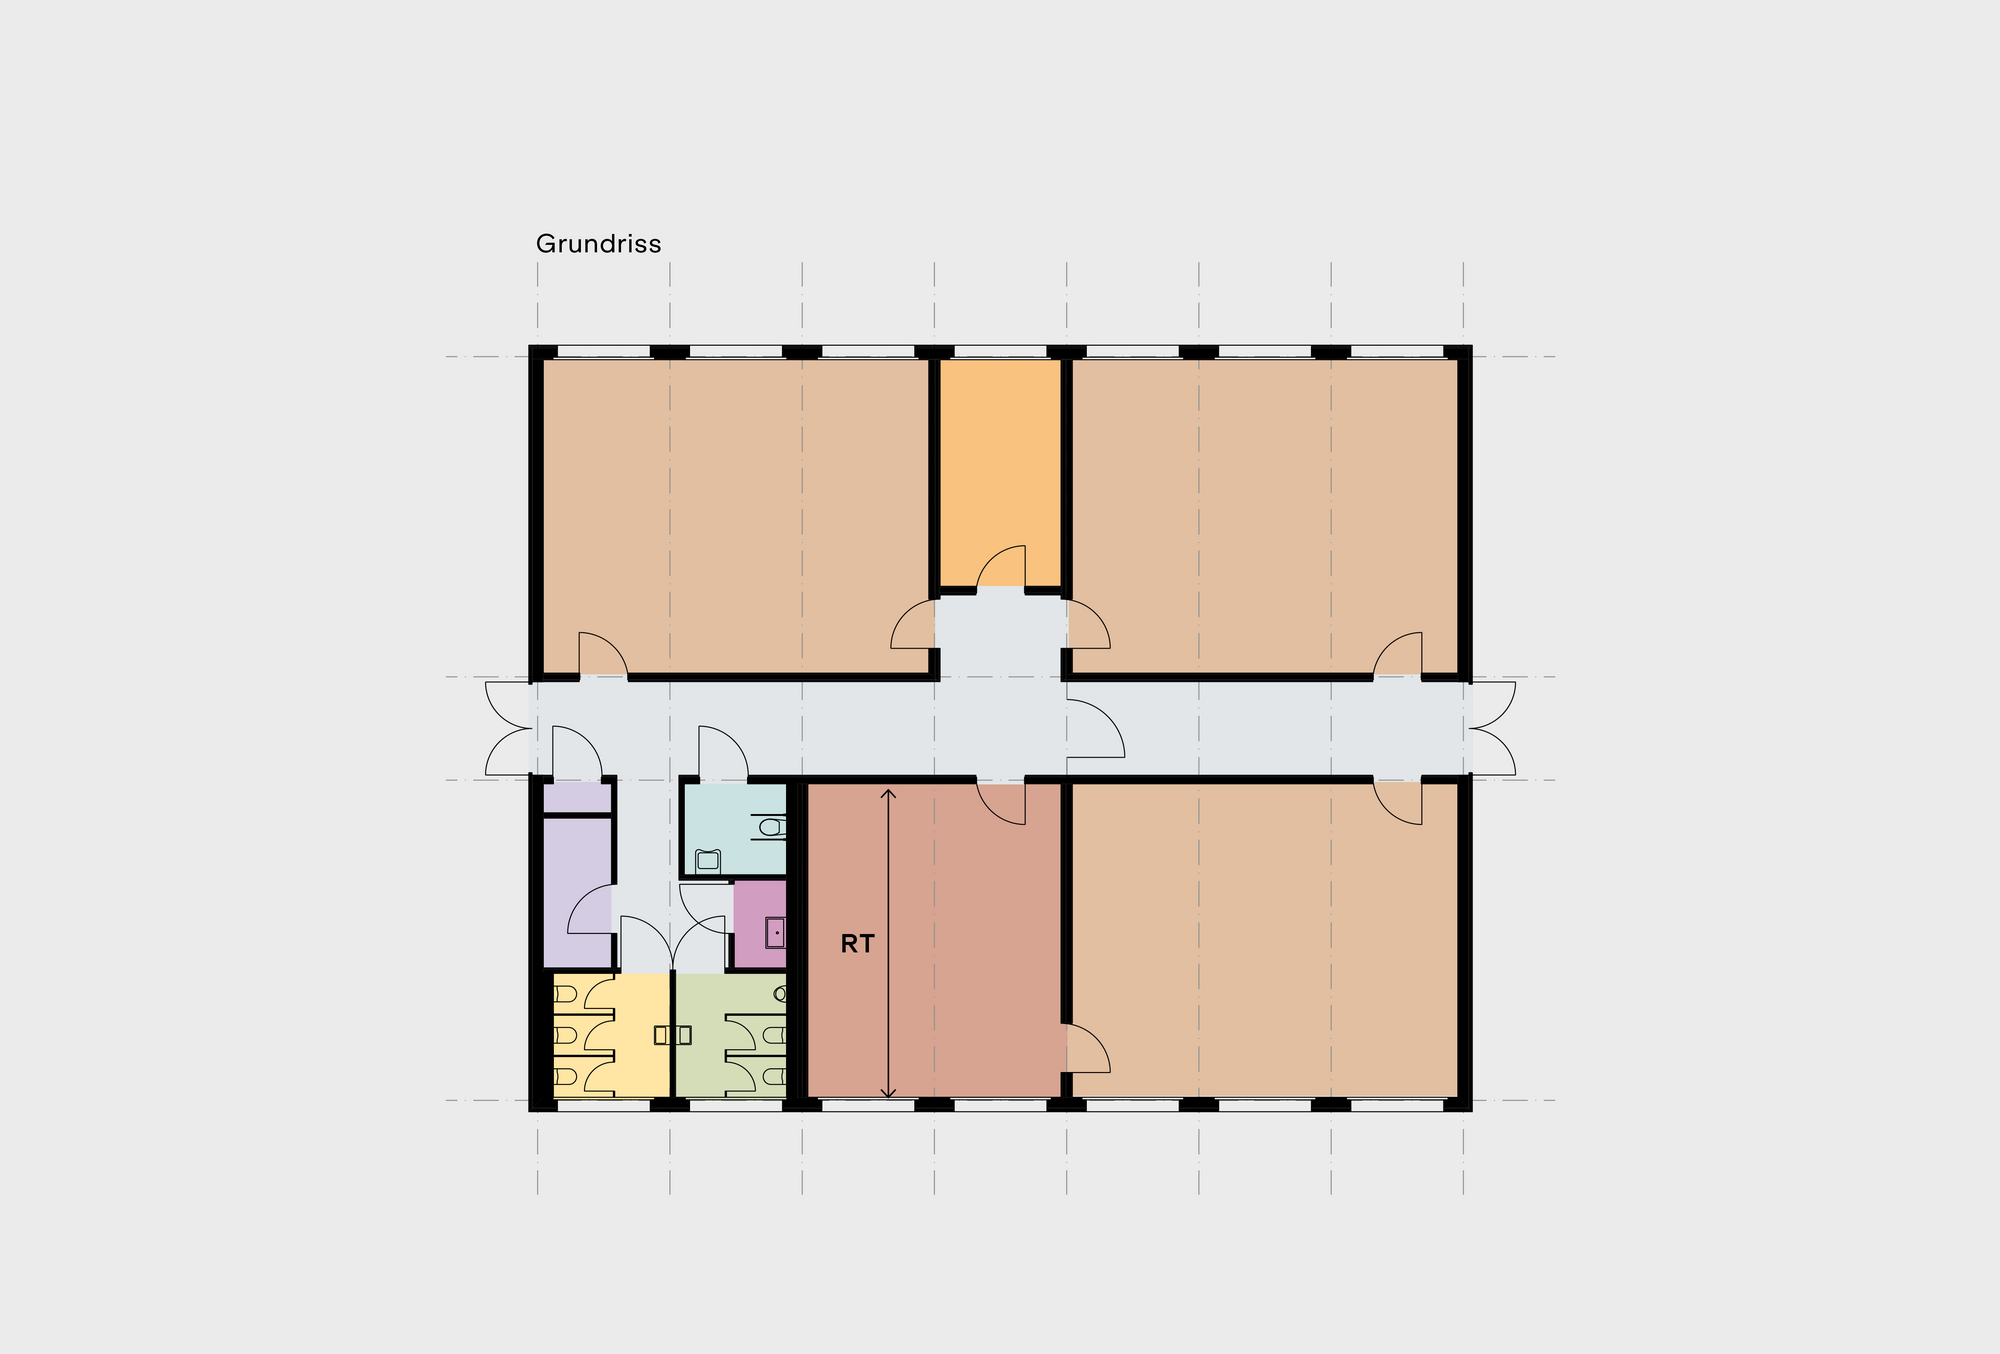 Floor plan of the small base model with functional spaces in modular timber construction